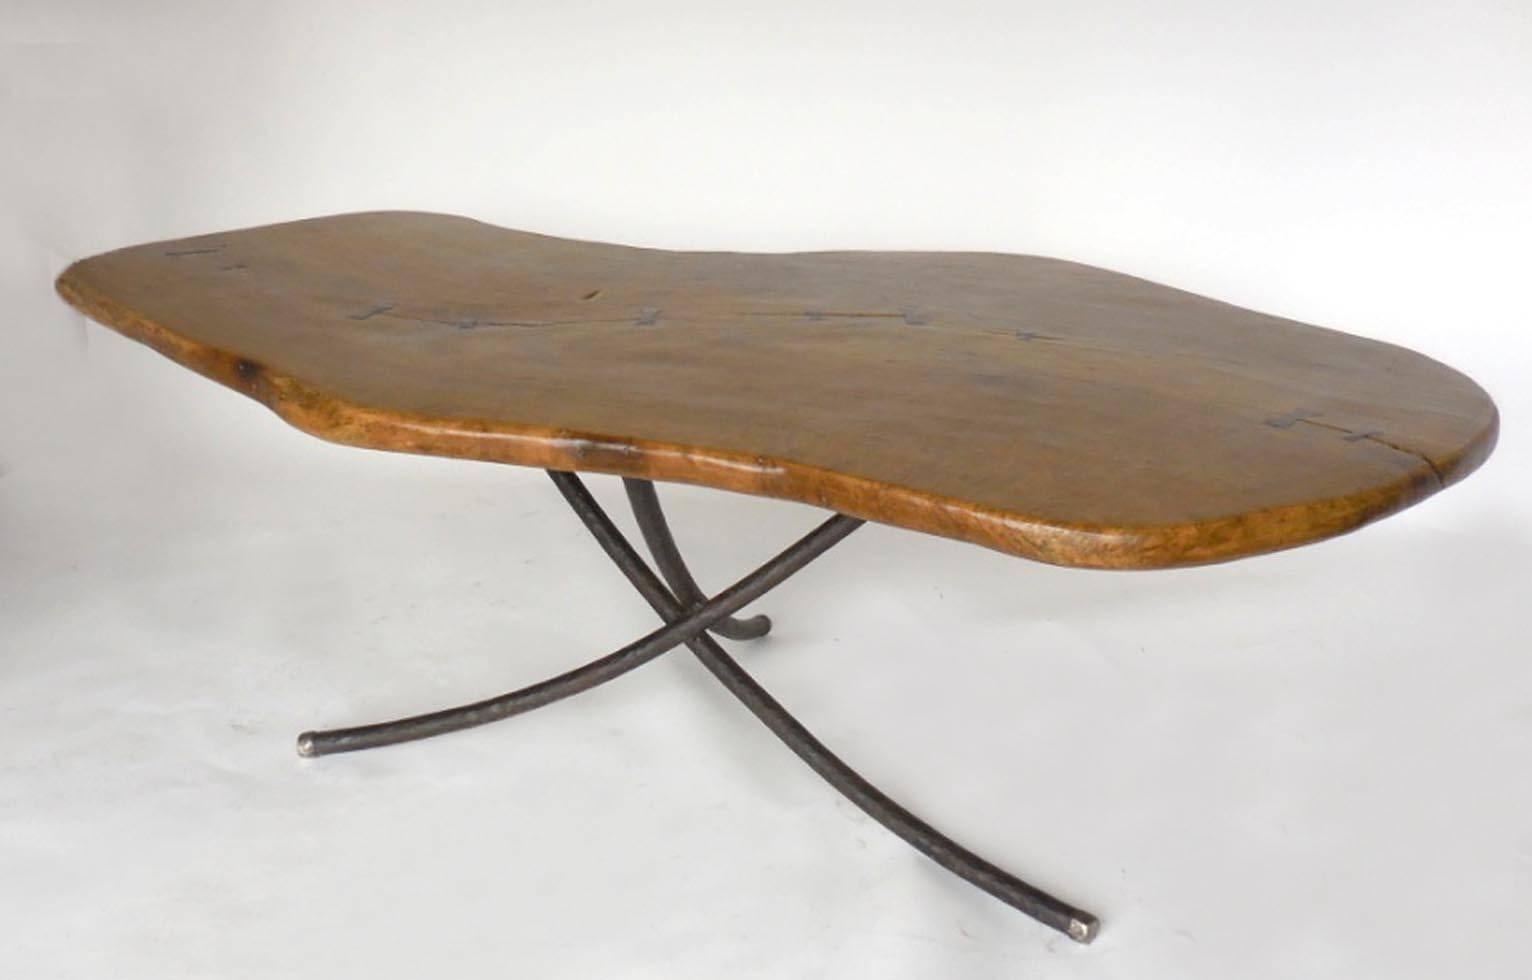 Molave, a tropical hardwood, table in an organic shape with contrasting dark wood butterfly repairs along top. Wood is beautifully burled in a rich wood tone. The base is constructed of hand-forged, hand-hammered iron legs with pewter tips. Can be